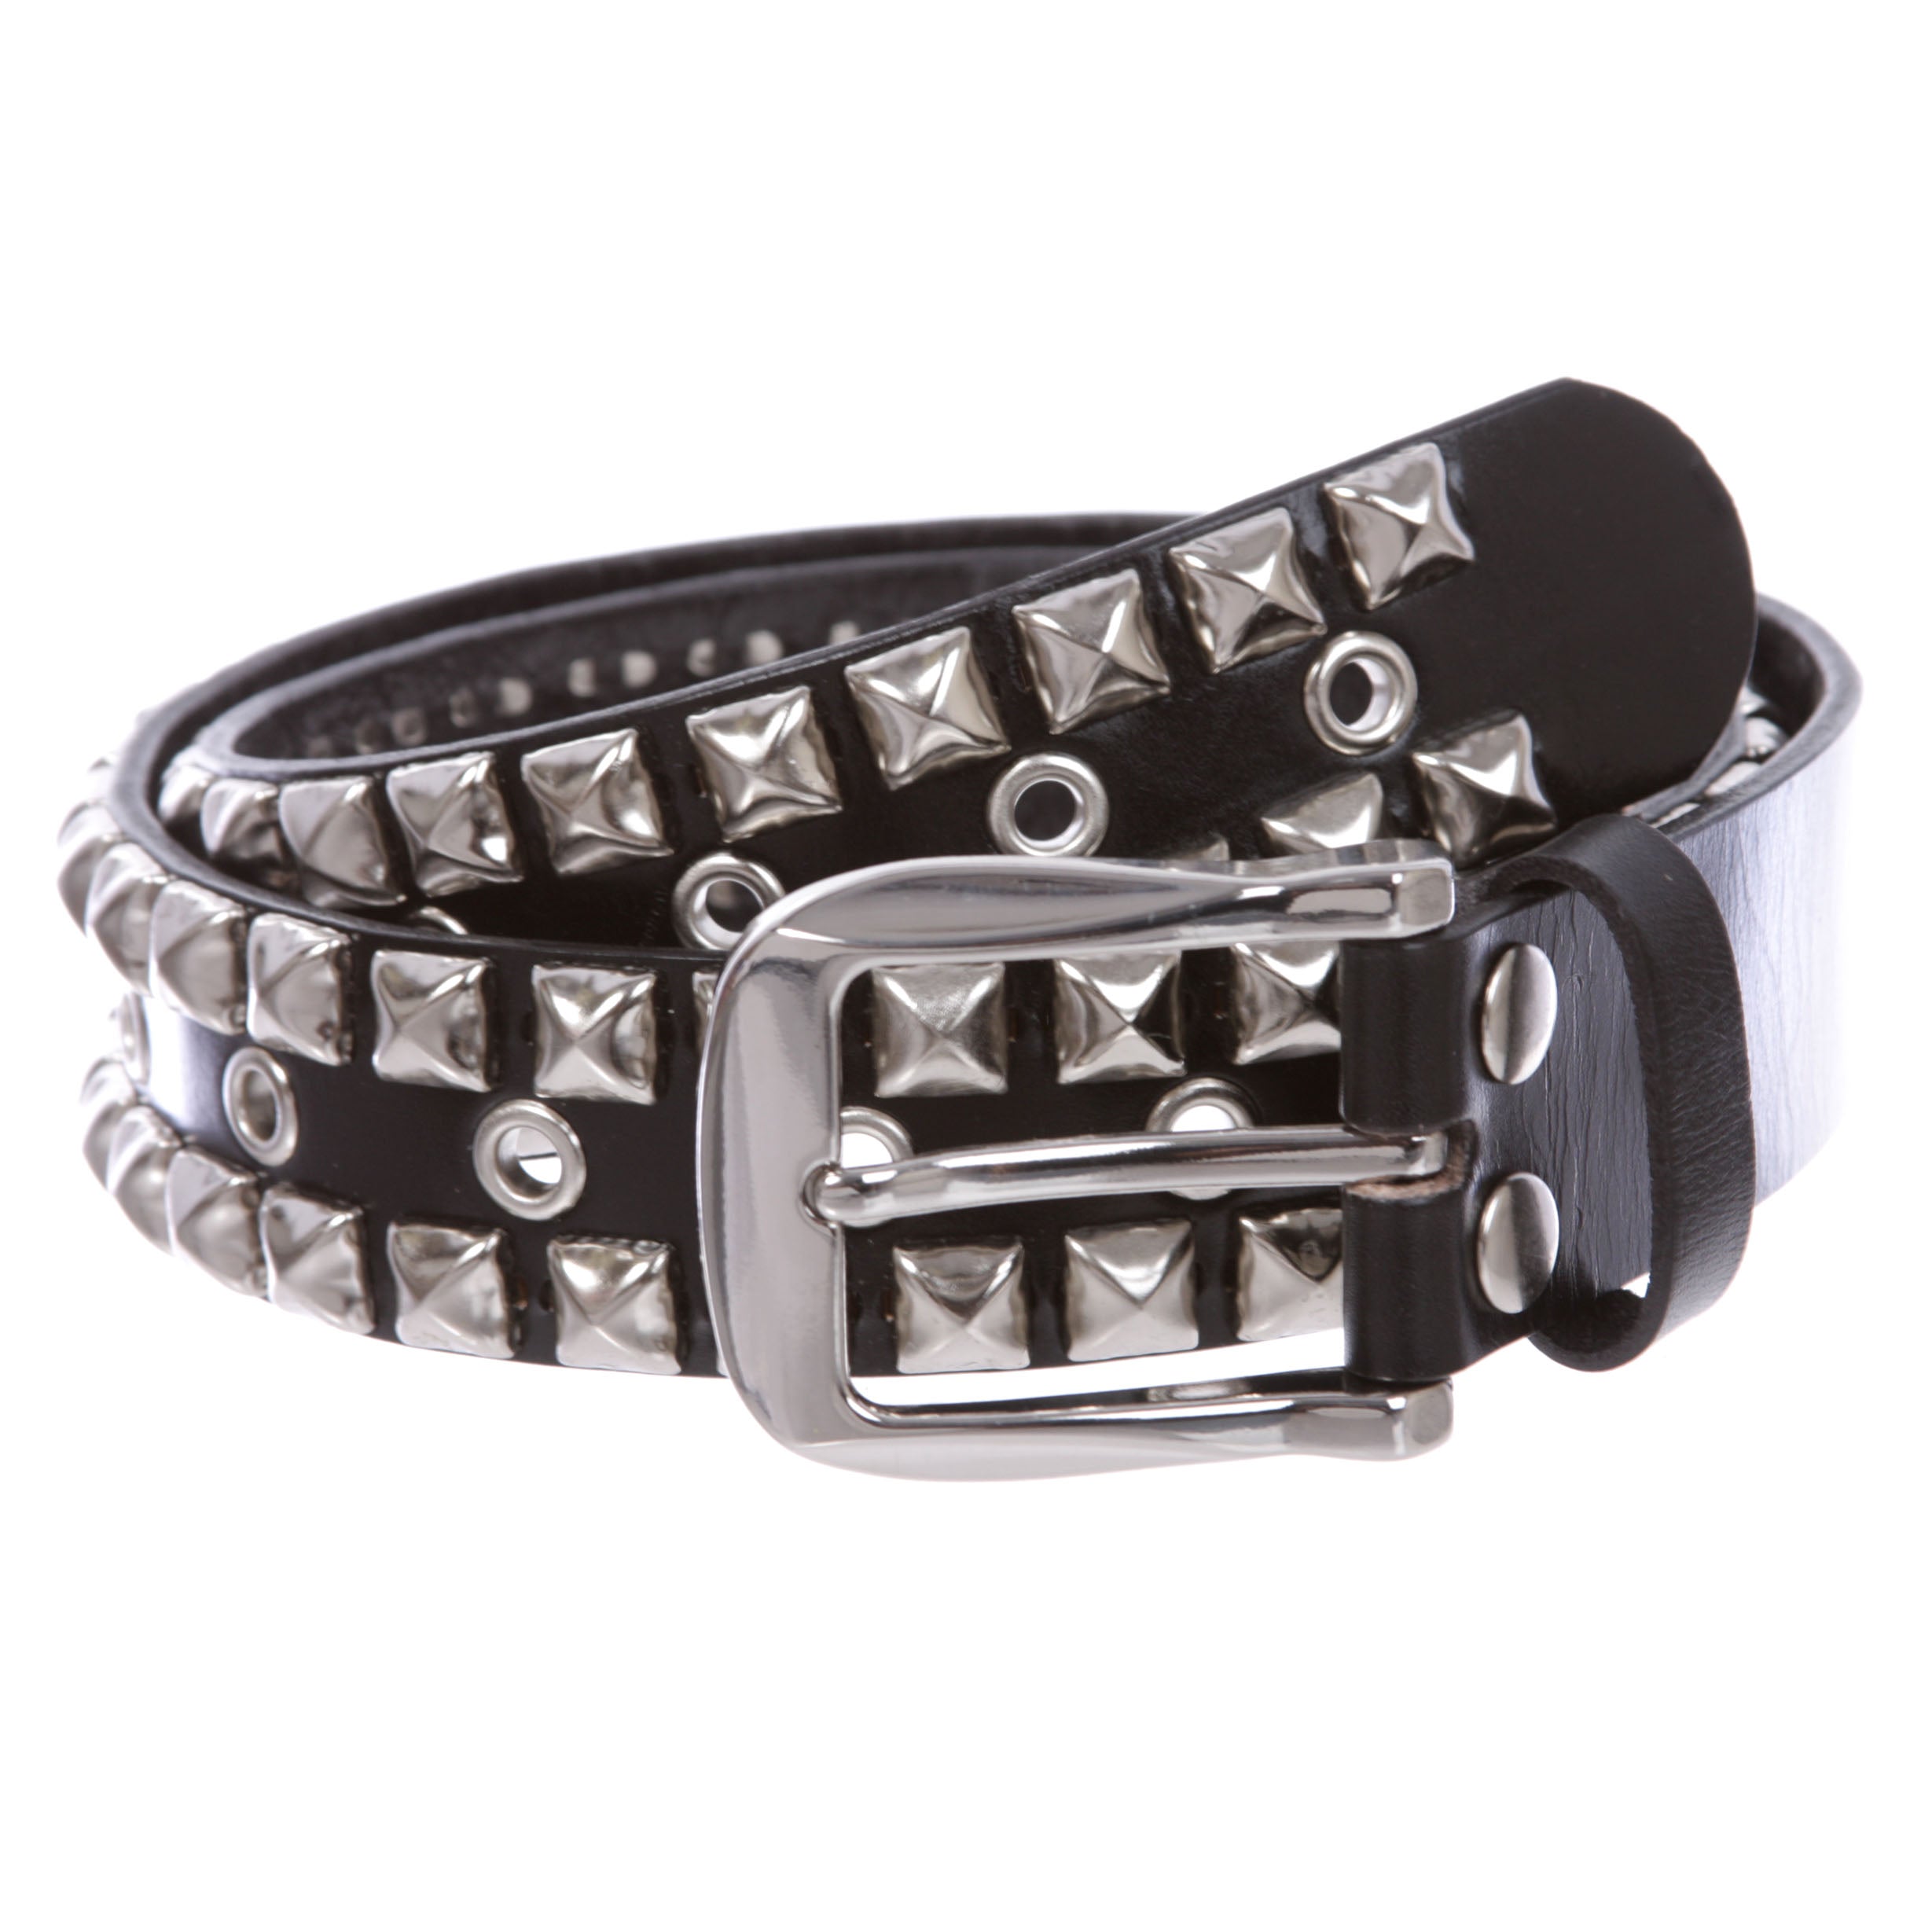 Snap On Two Row Punk Rock Silver Star Studs with Grommets Leather Belt